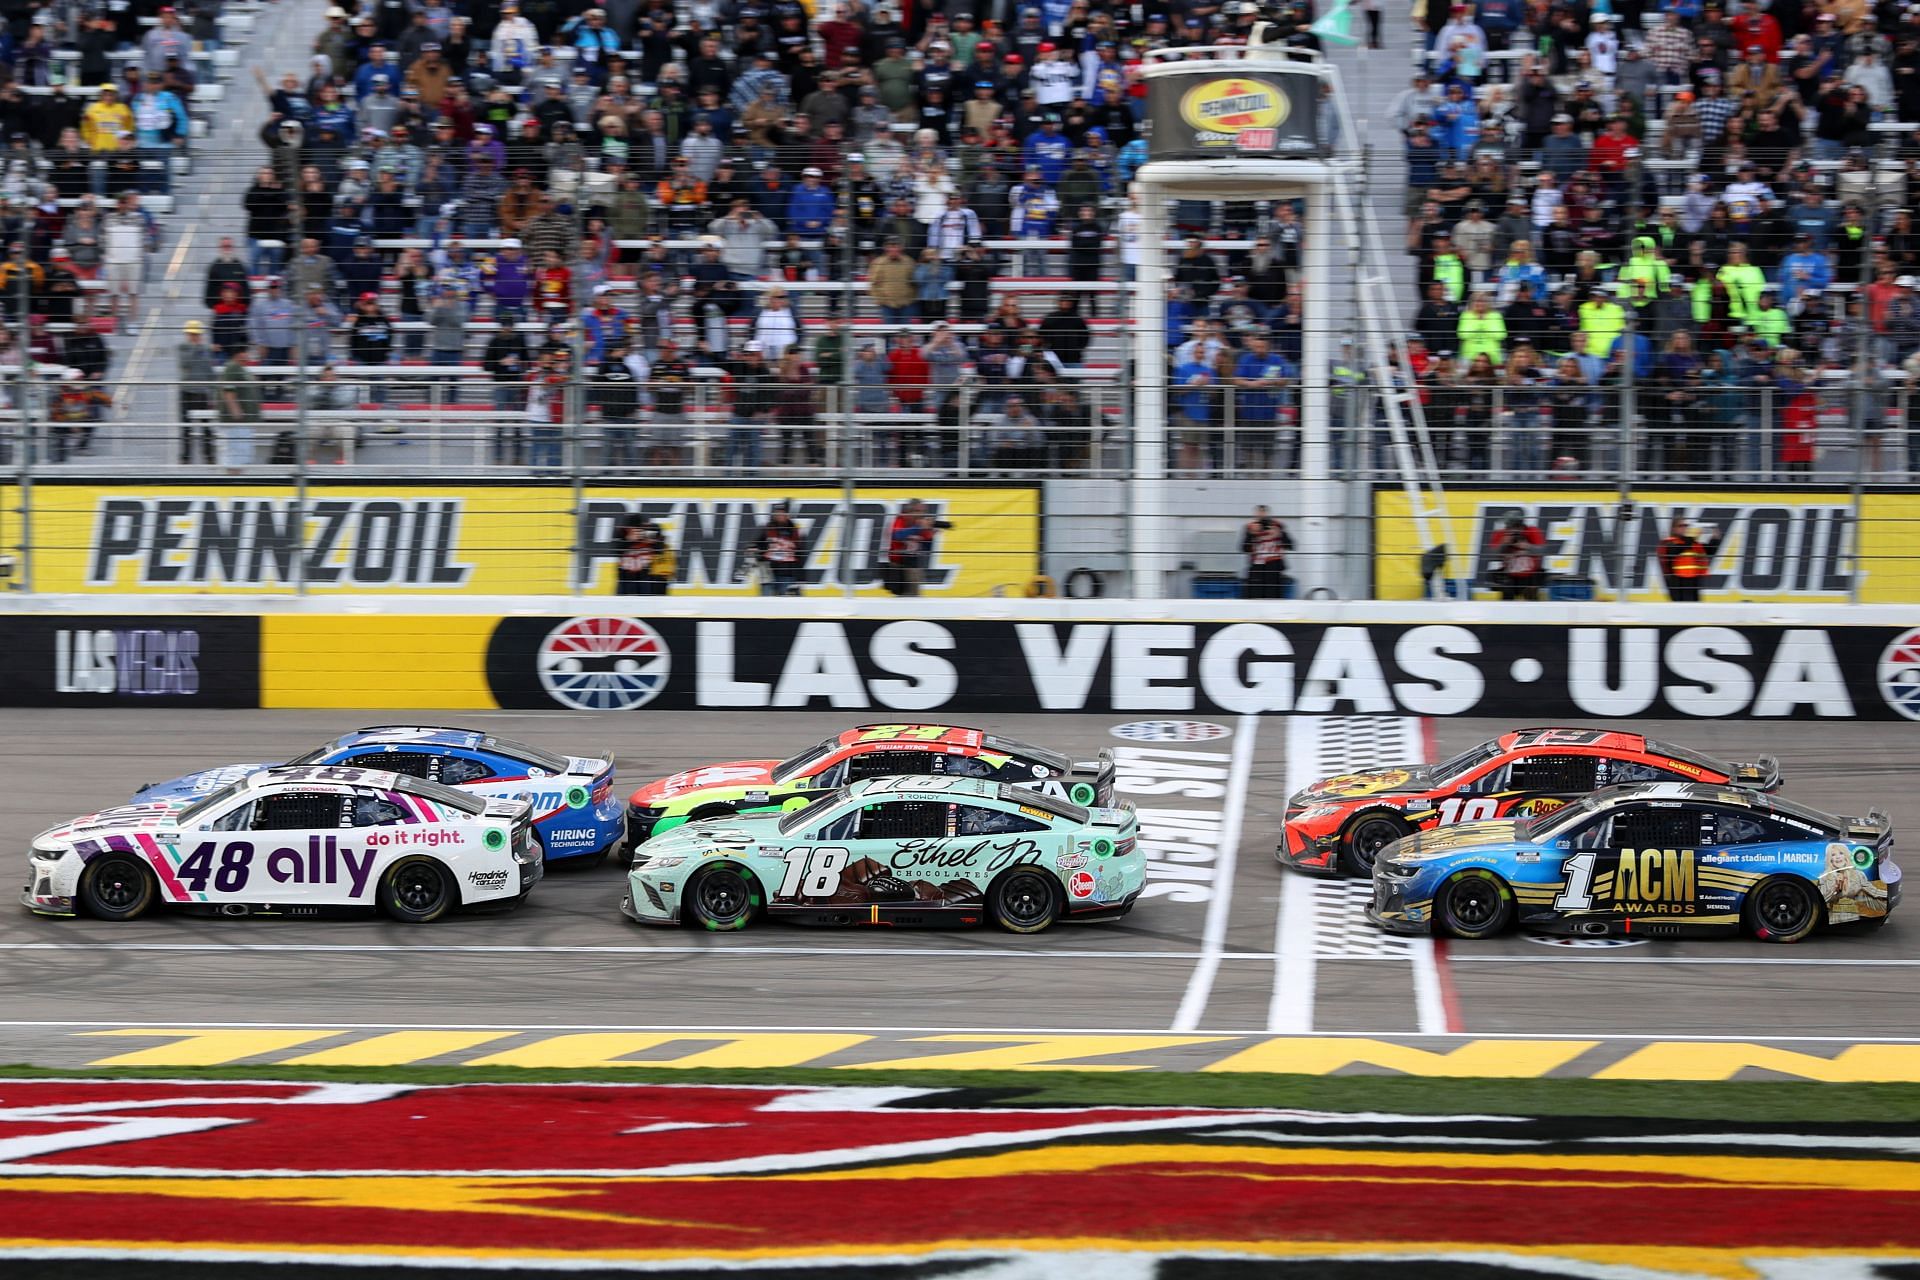 NASCAR 2023 Where to watch Pennzoil 400 at Las Vegas Motor Speedway race? Time, TV Schedule and Live Stream